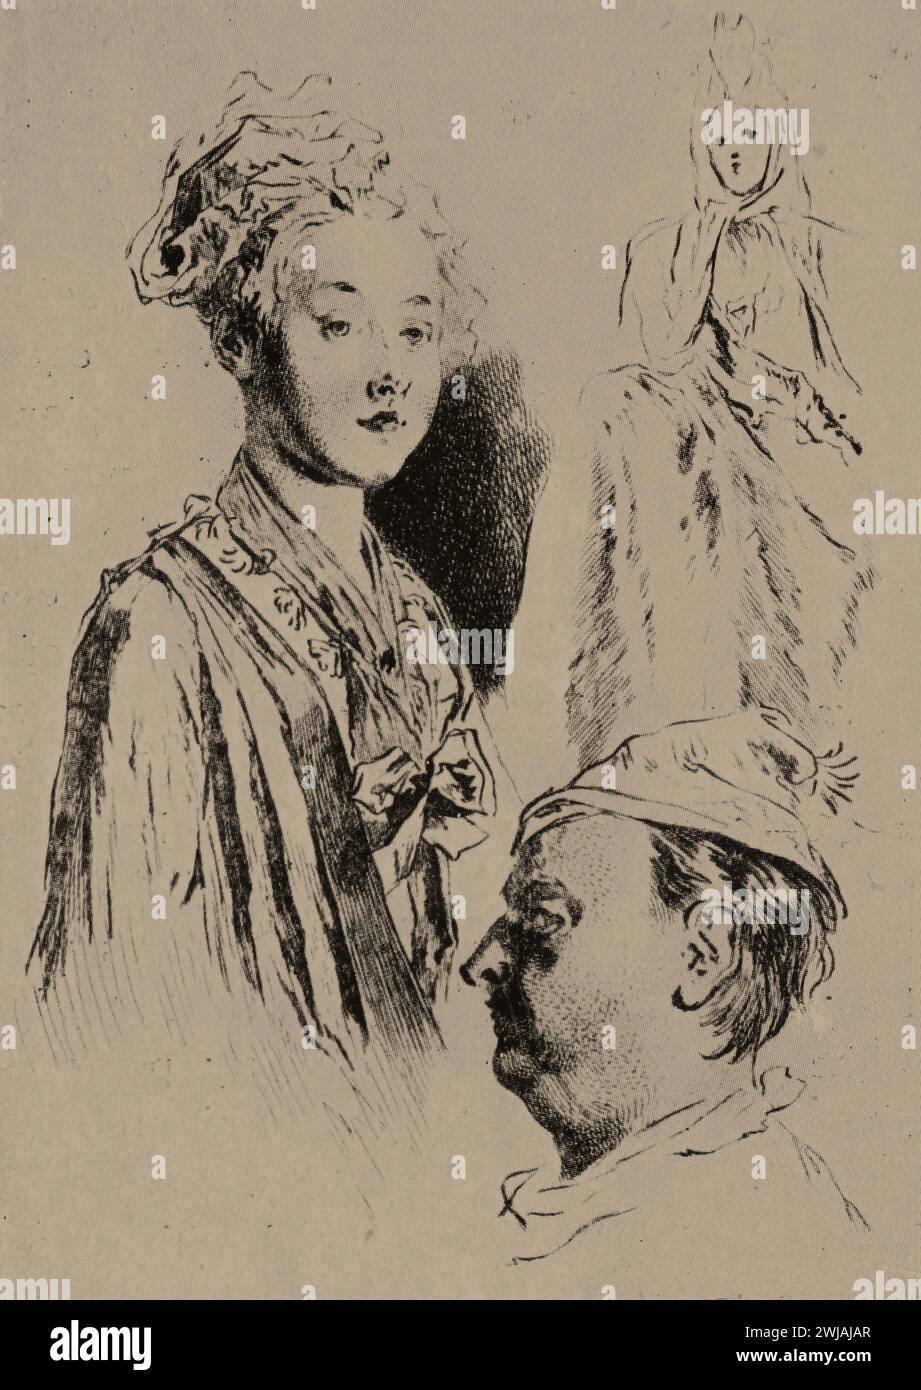 Study of Heads. Le Sieur Girois and his Beautiful Maid Servant by French Artist, Jean-Antoine Watteau: Black and White Illustration from the Connoisseur, an Illustrated Magazine for Collectors Voll 3 (May-Aug 1902) published in London. Stock Photo